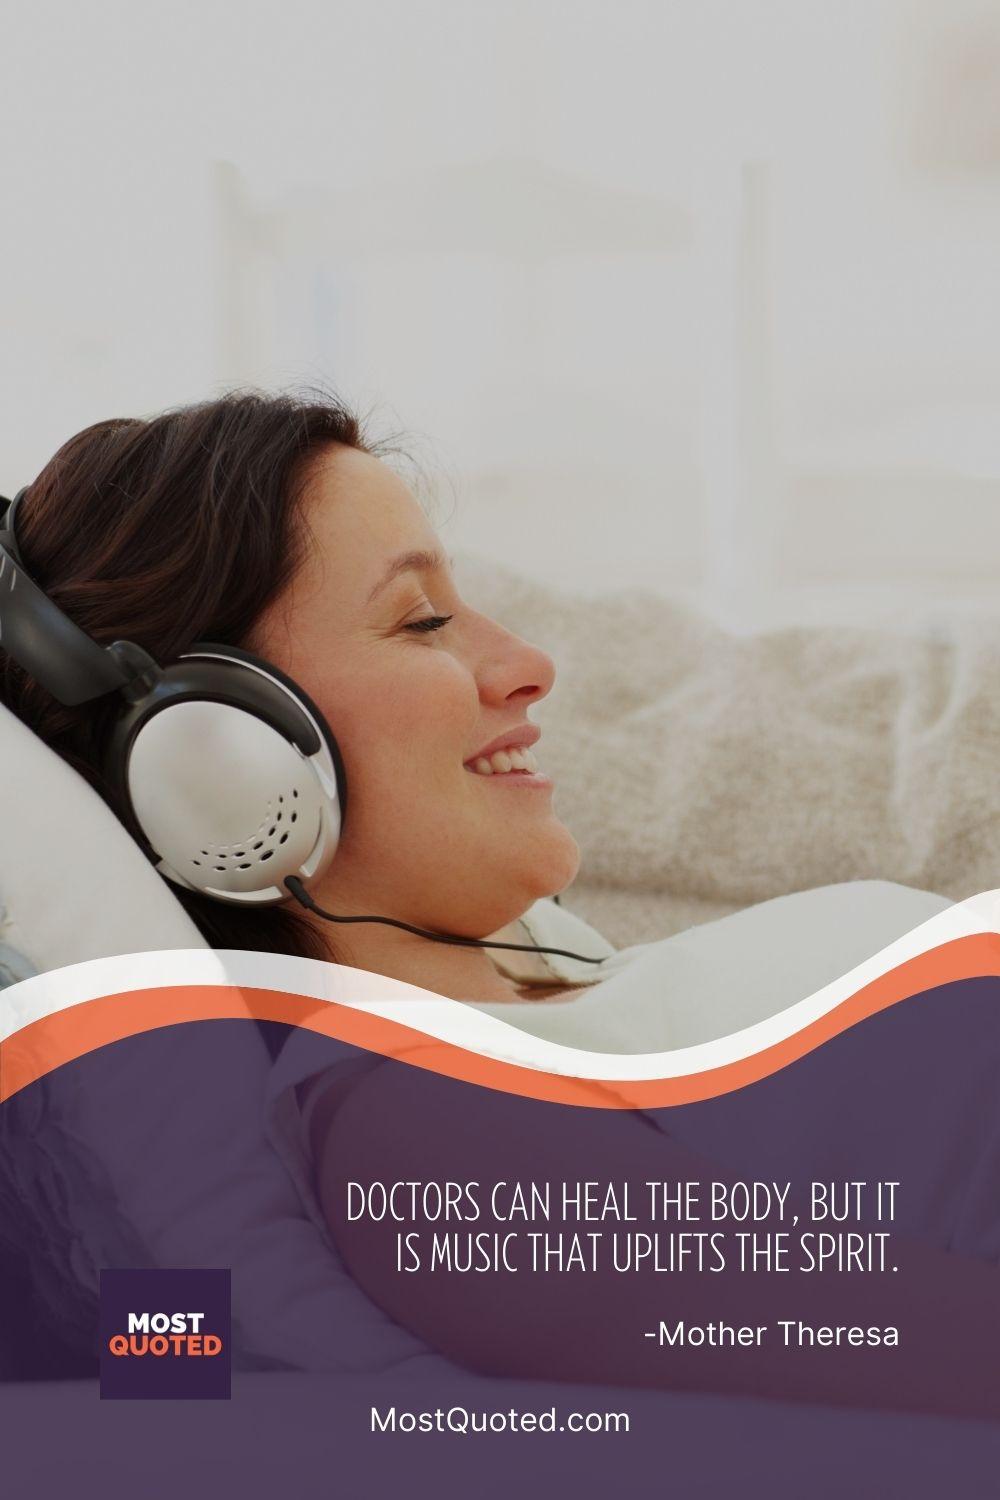 Doctors can heal the body, but it is music that uplifts the spirit. - Mother Teresa